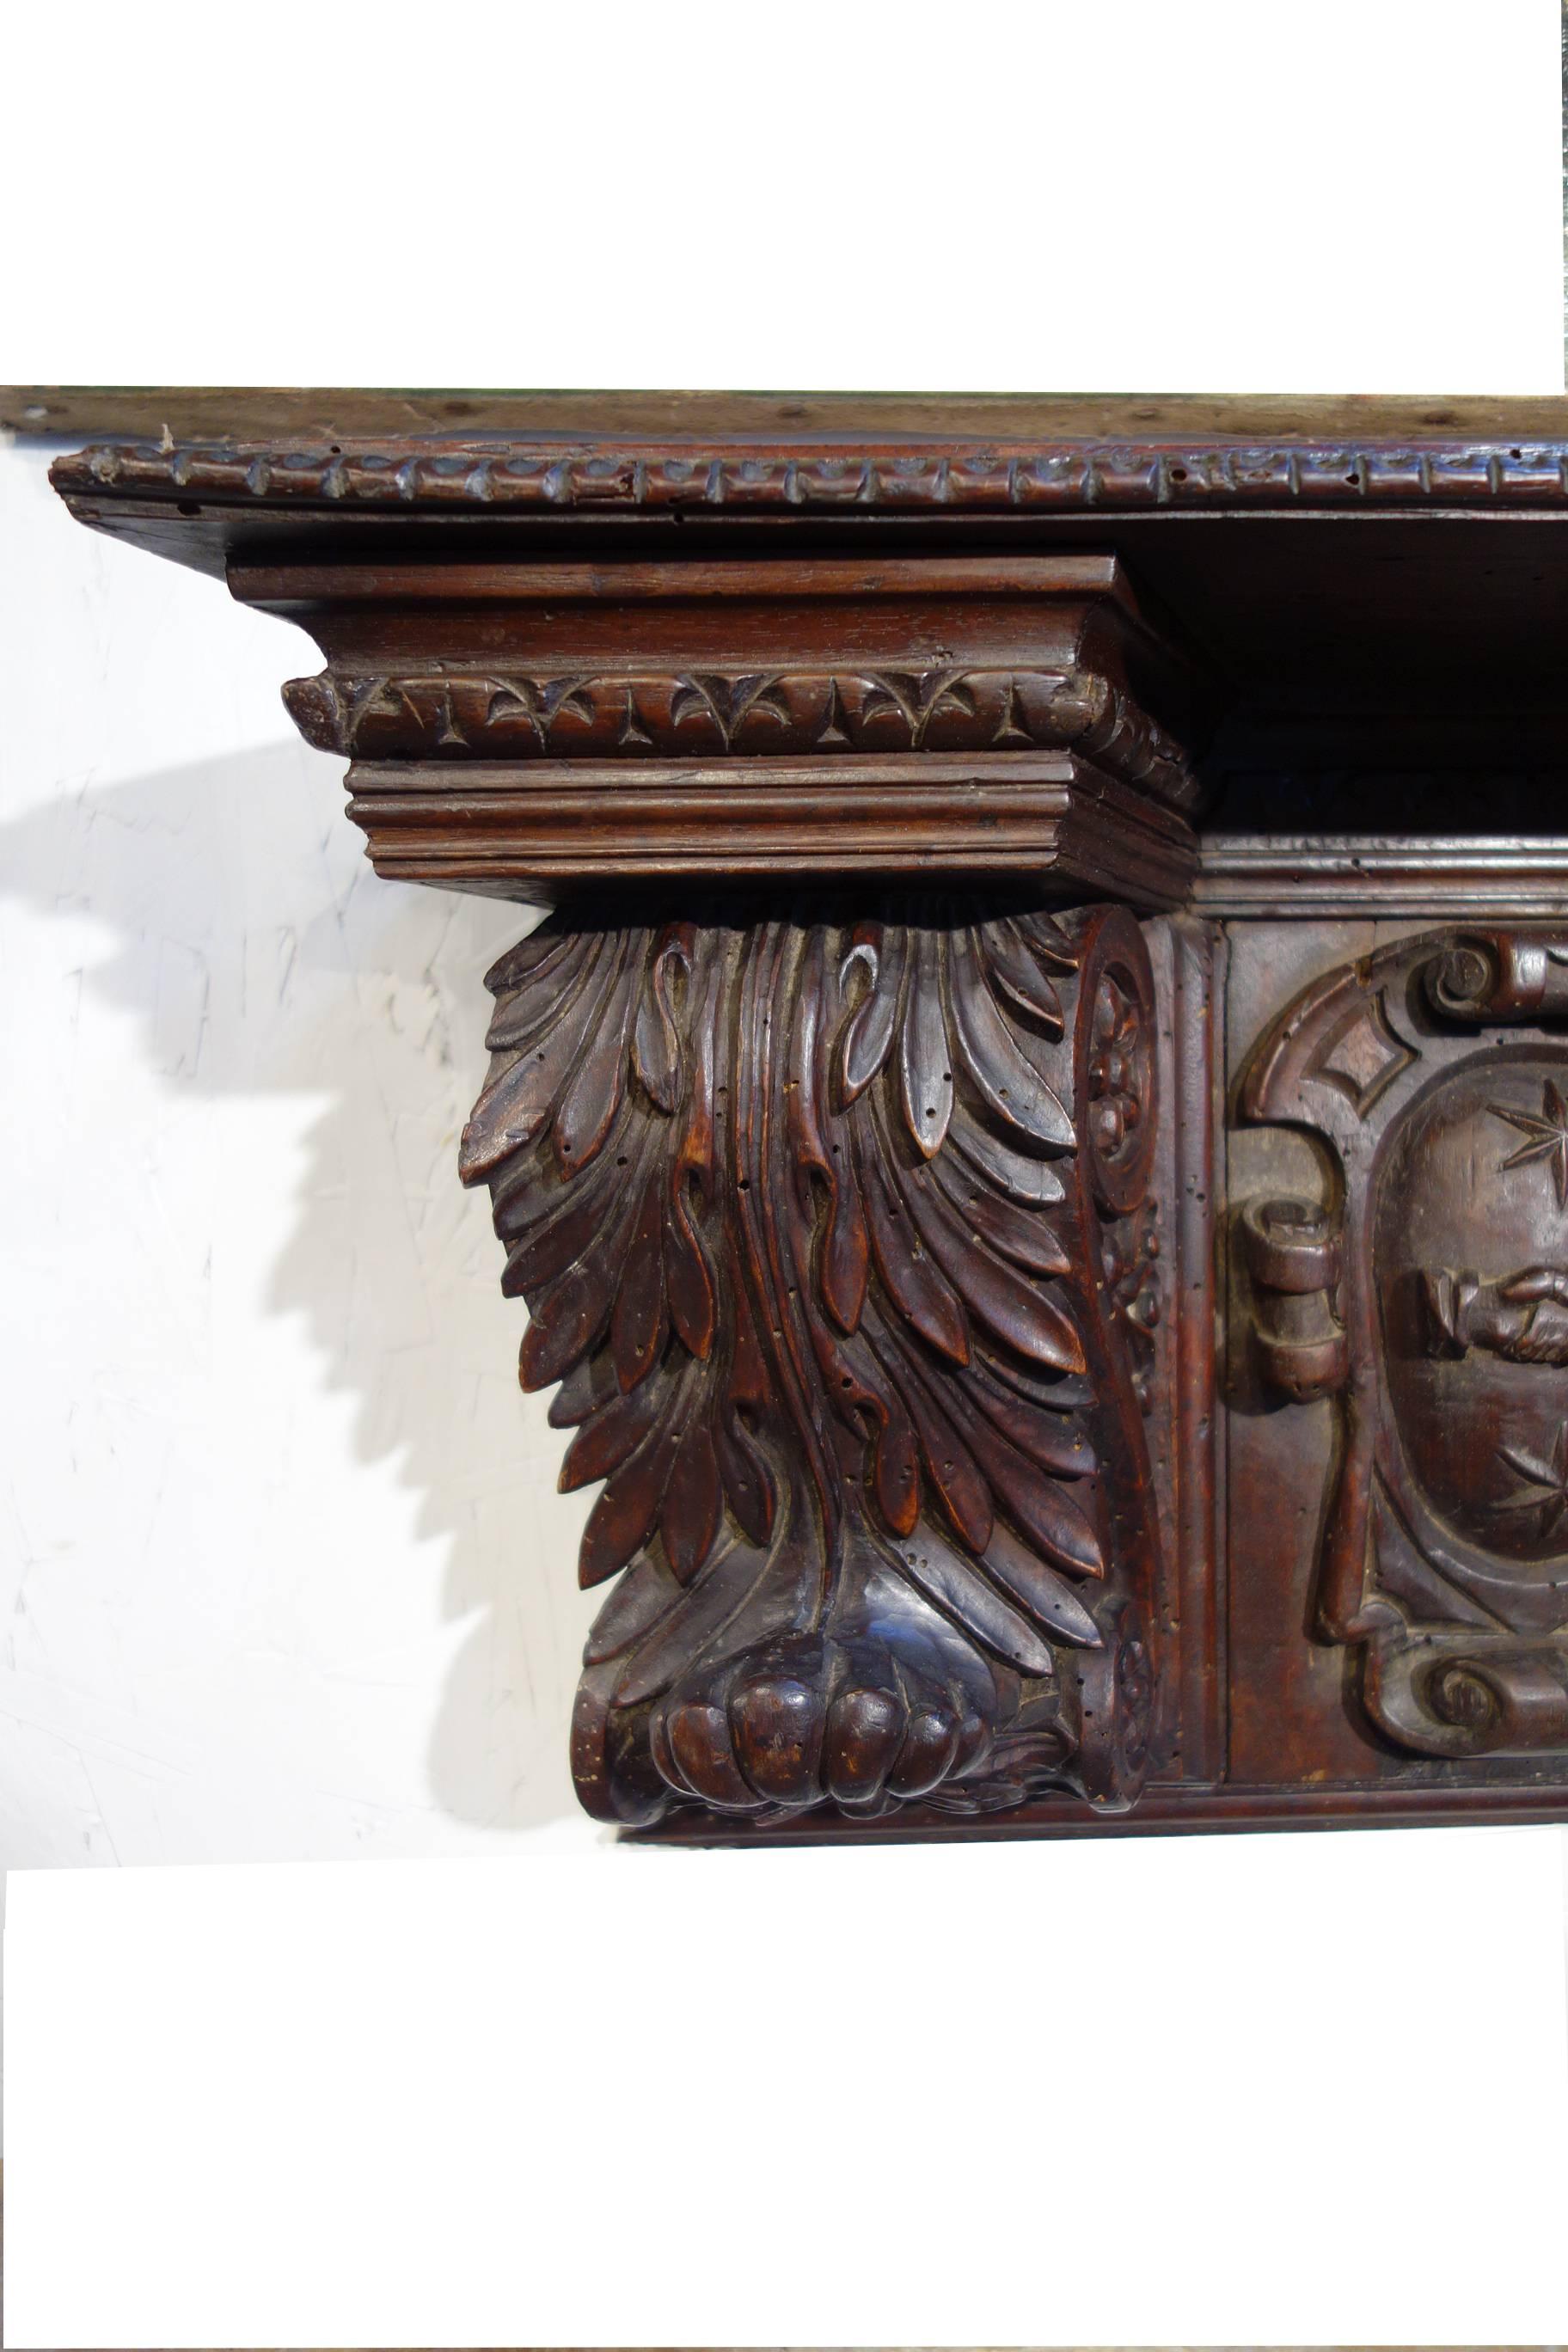 Striking mid-19th century old Italian walnut architectural element, deeply hand-carved Renaissance features, coat of arms, tapered width with functional shelf top.

Measures: 34